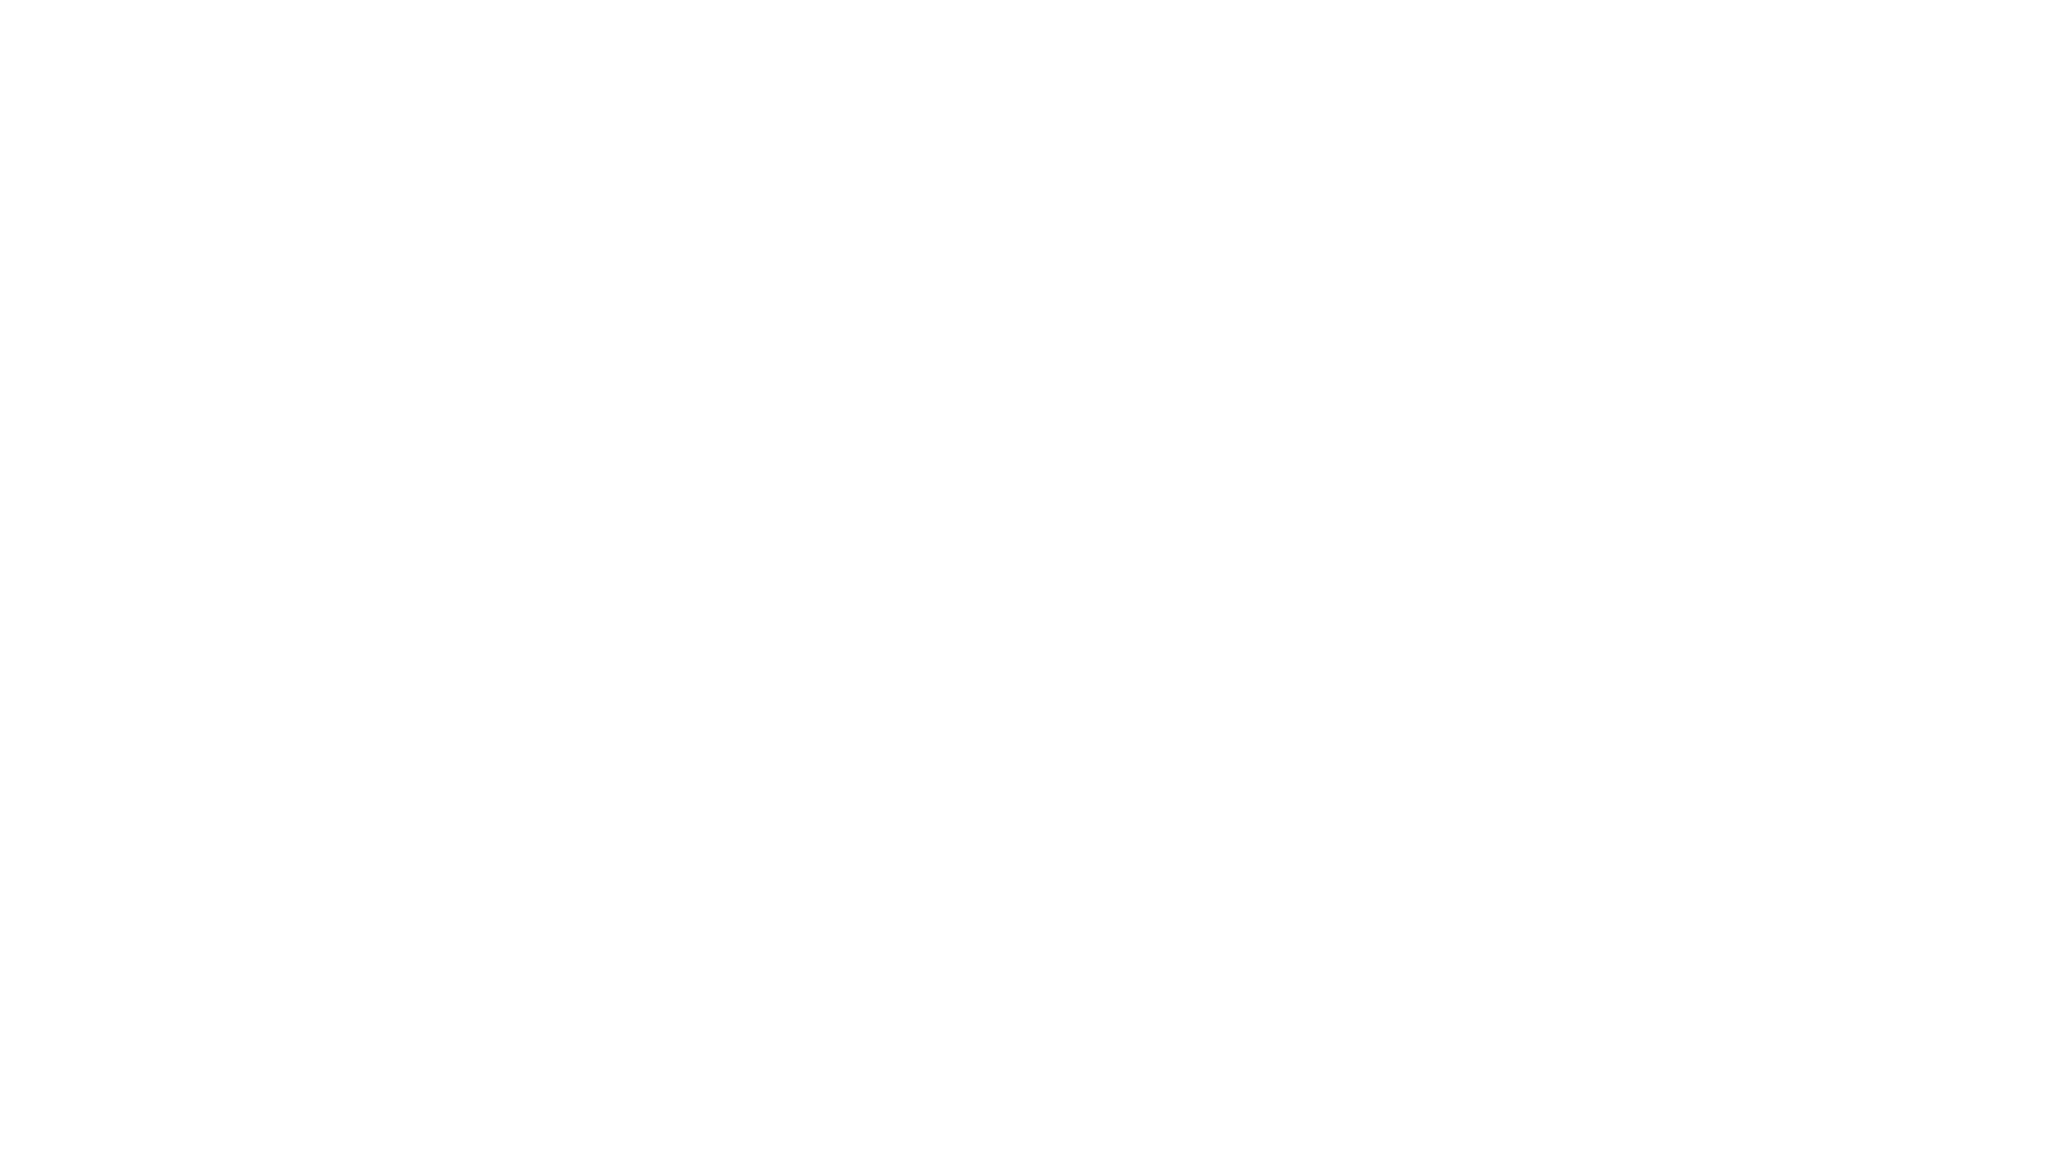 America's Finest Family Camp